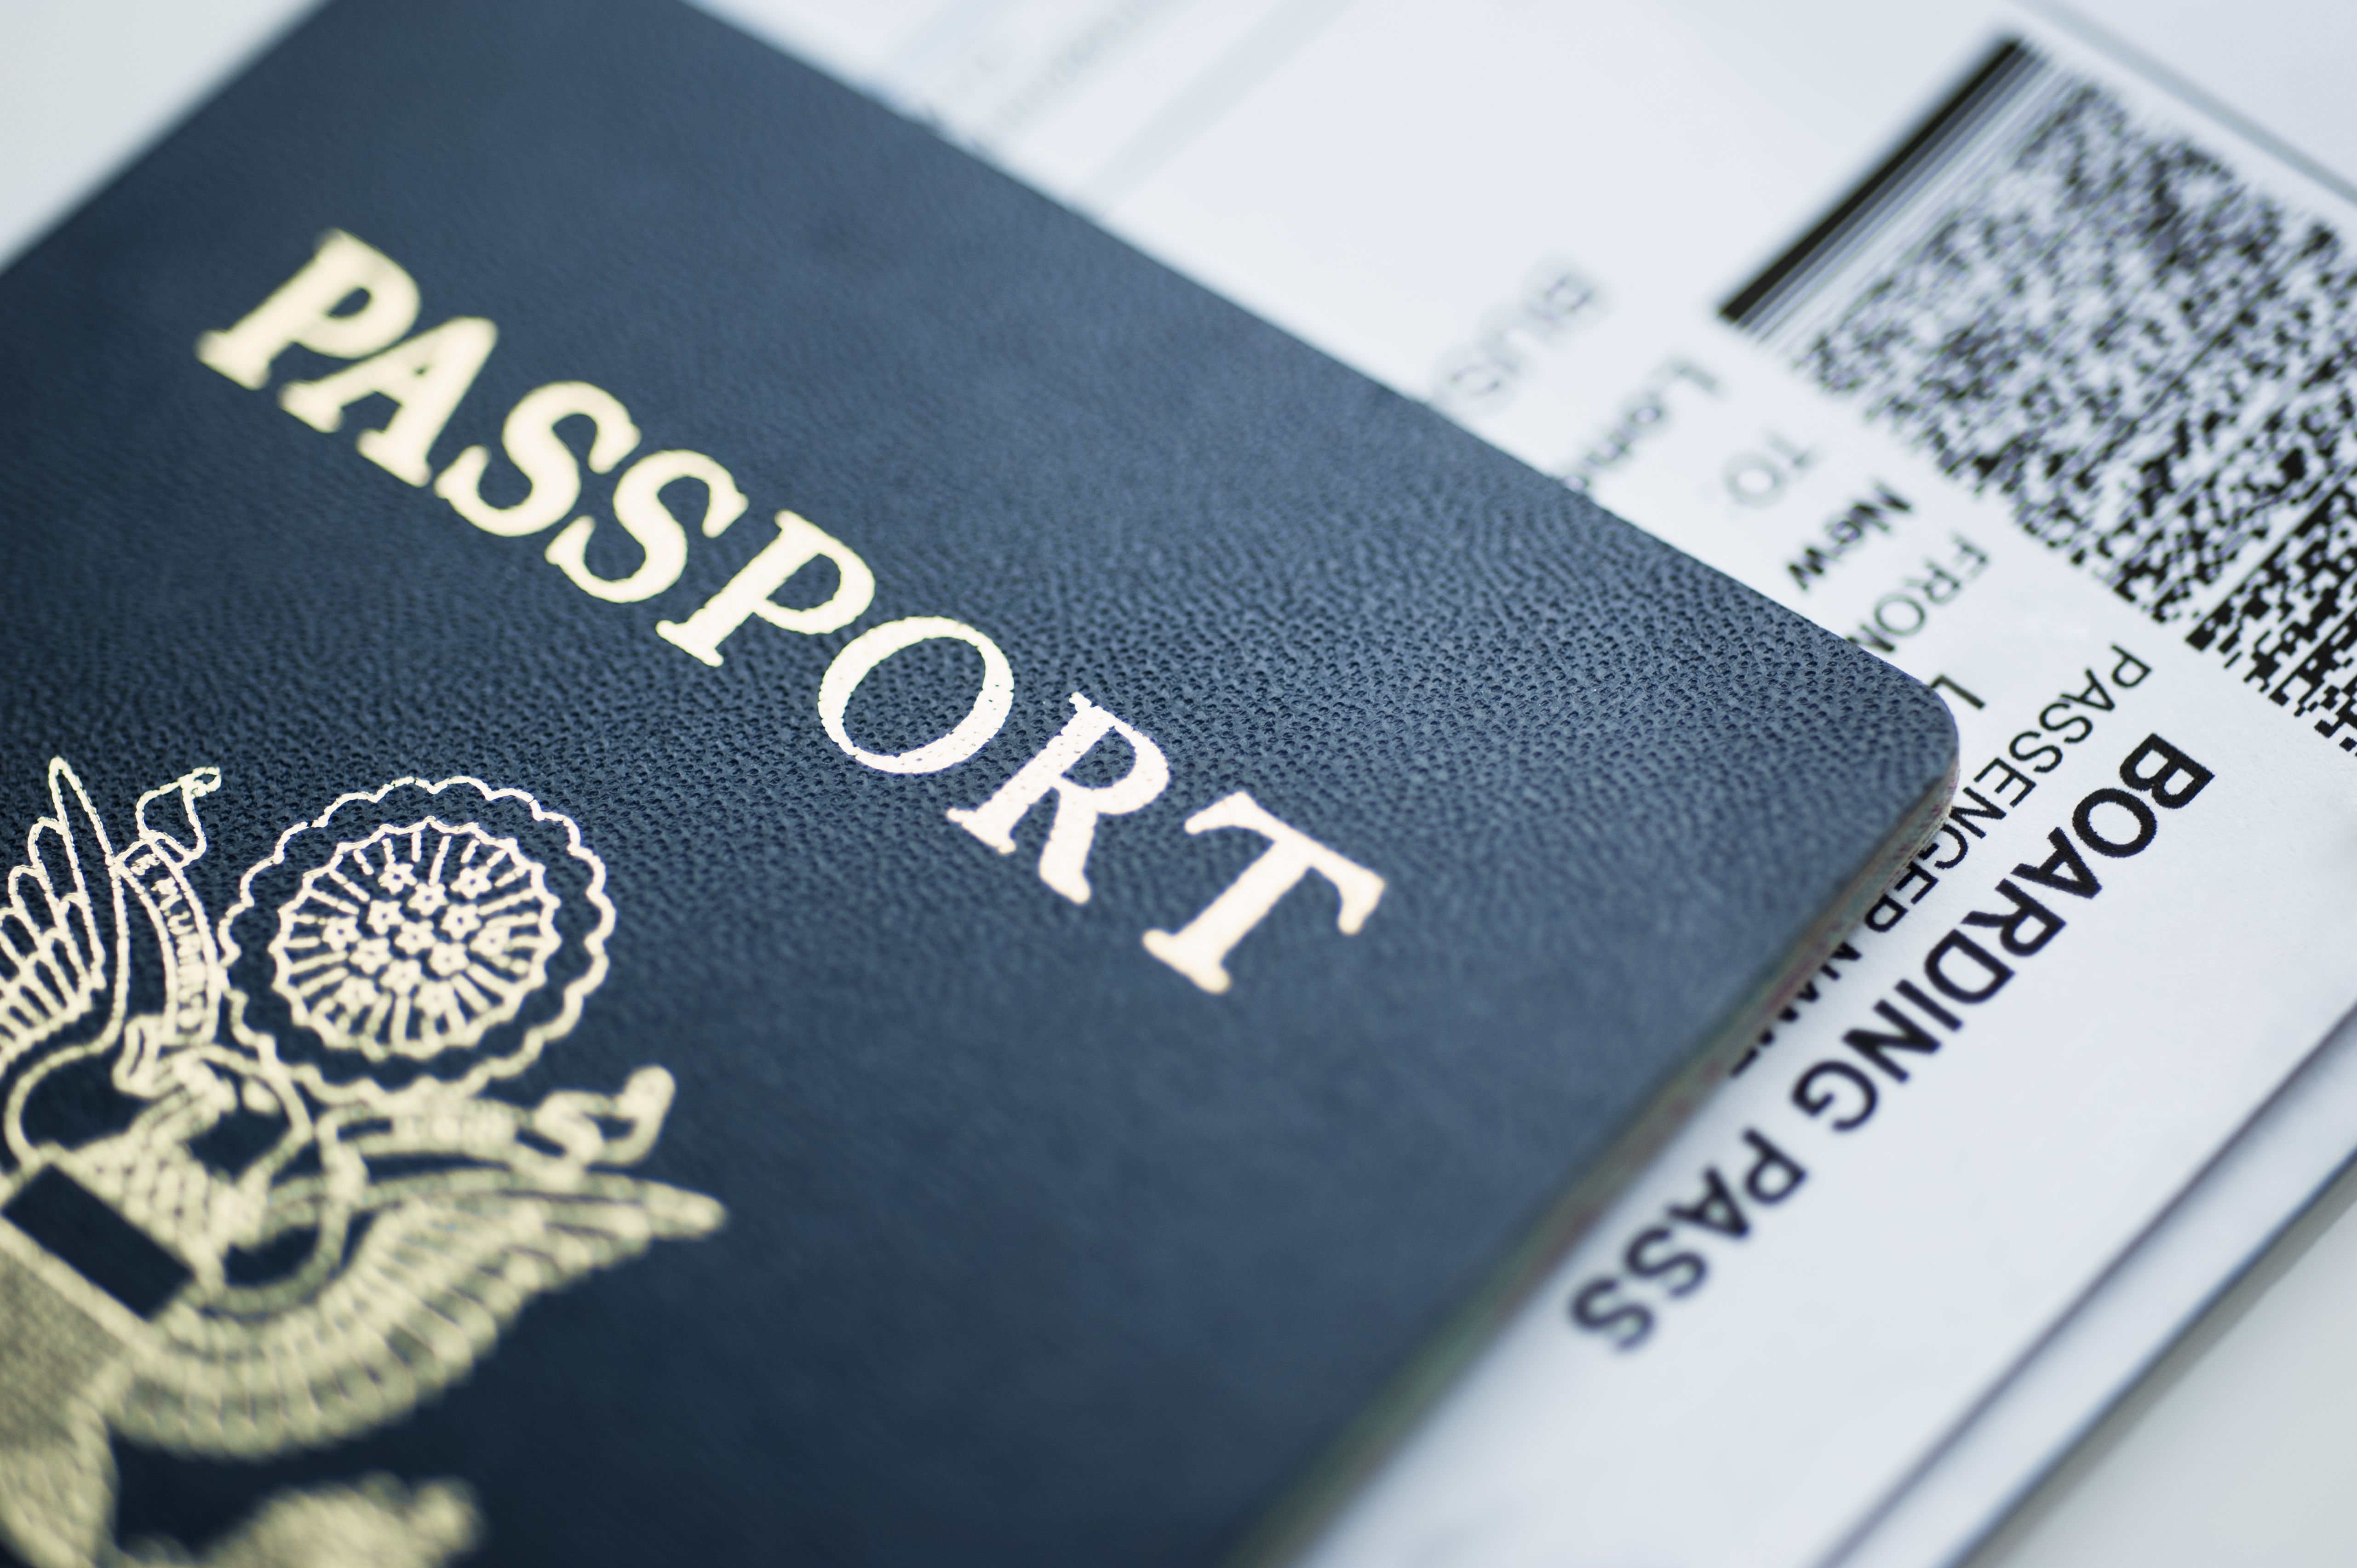 How to Apply for a US Passport